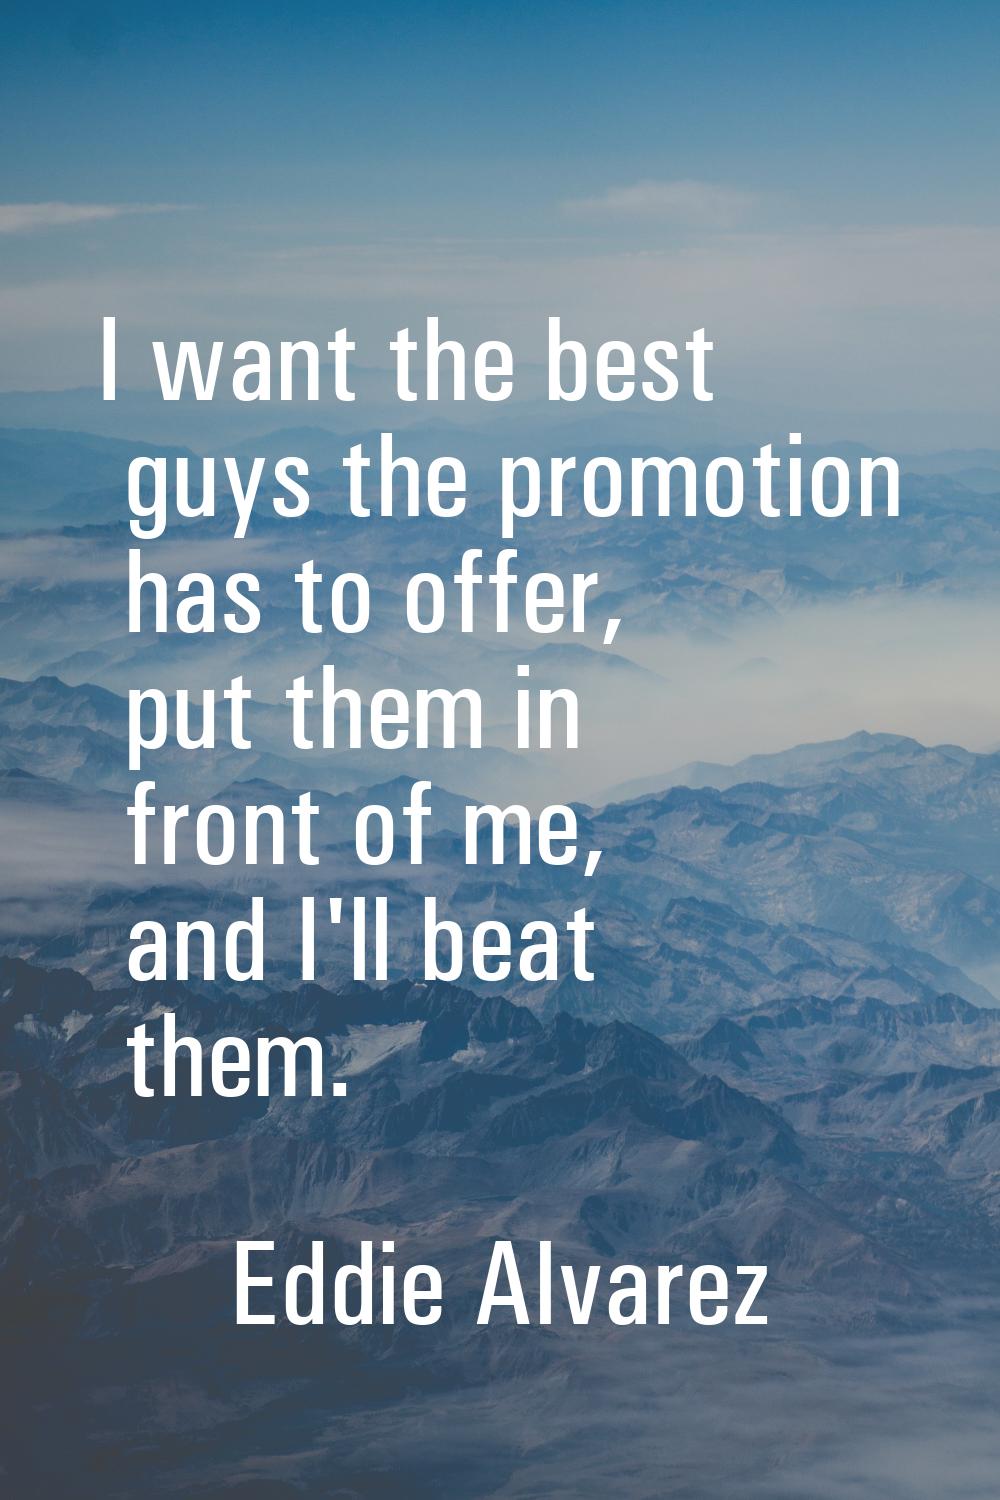 I want the best guys the promotion has to offer, put them in front of me, and I'll beat them.